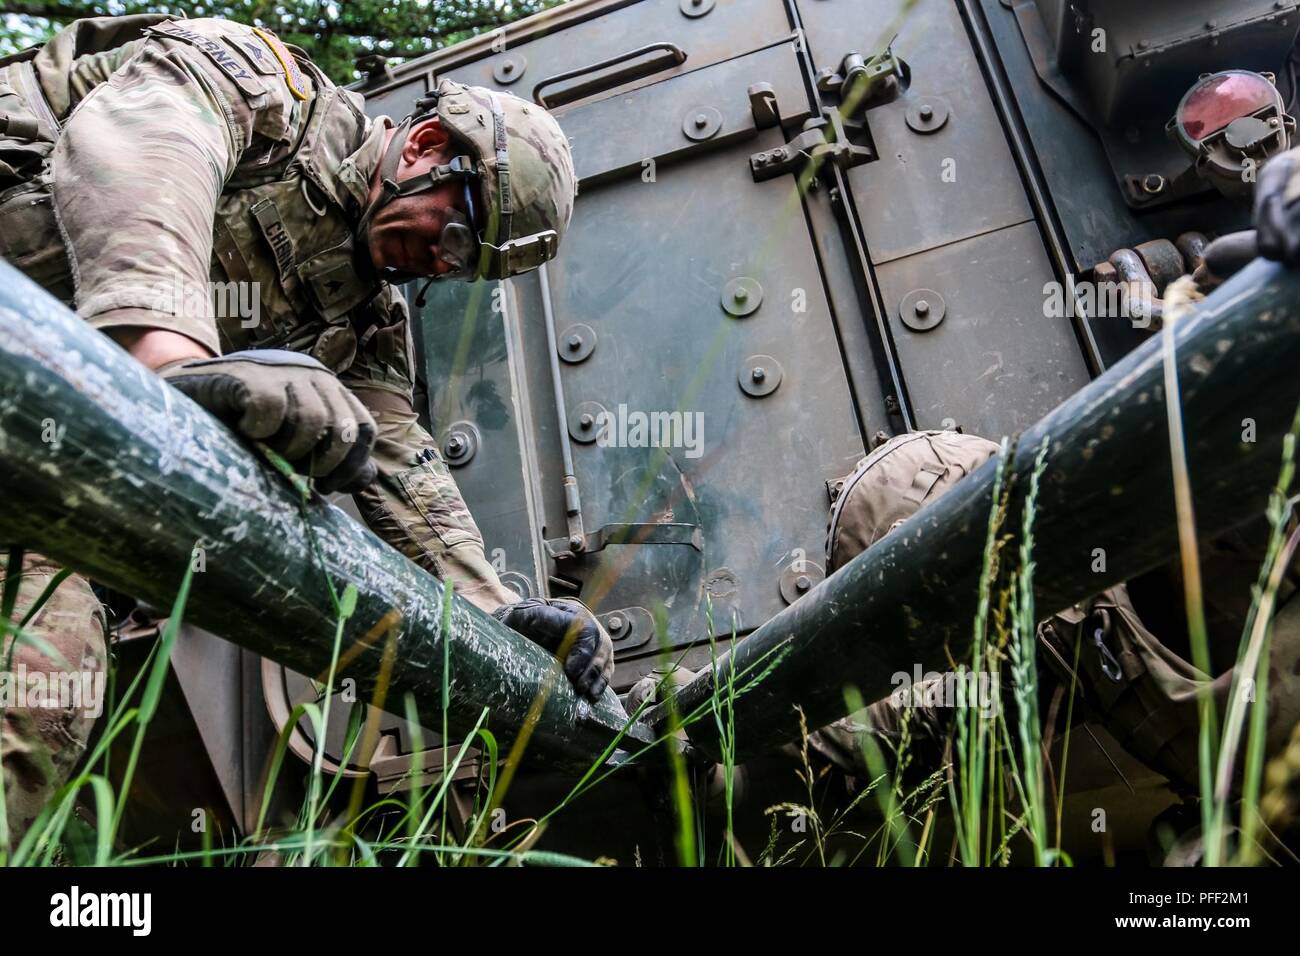 Sgt. Eric Cherney, vehicle commander with 1st Squadron, 2nd Cavalry Regiment, maintains an Interim Armored Vehicle 'Stryker” with another Soldier during exercise Puma 2 with Battle Group Poland at Bemowo Piskie Training Area, Poland on June 13, 2018 in the midst of Saber Strike 18. This year's exercise, which runs from June 3-15, tests allies and partners from 19 countries on their ability work together to deter aggression in the region and improve each unit's ability to perform their designated mission. Stock Photo